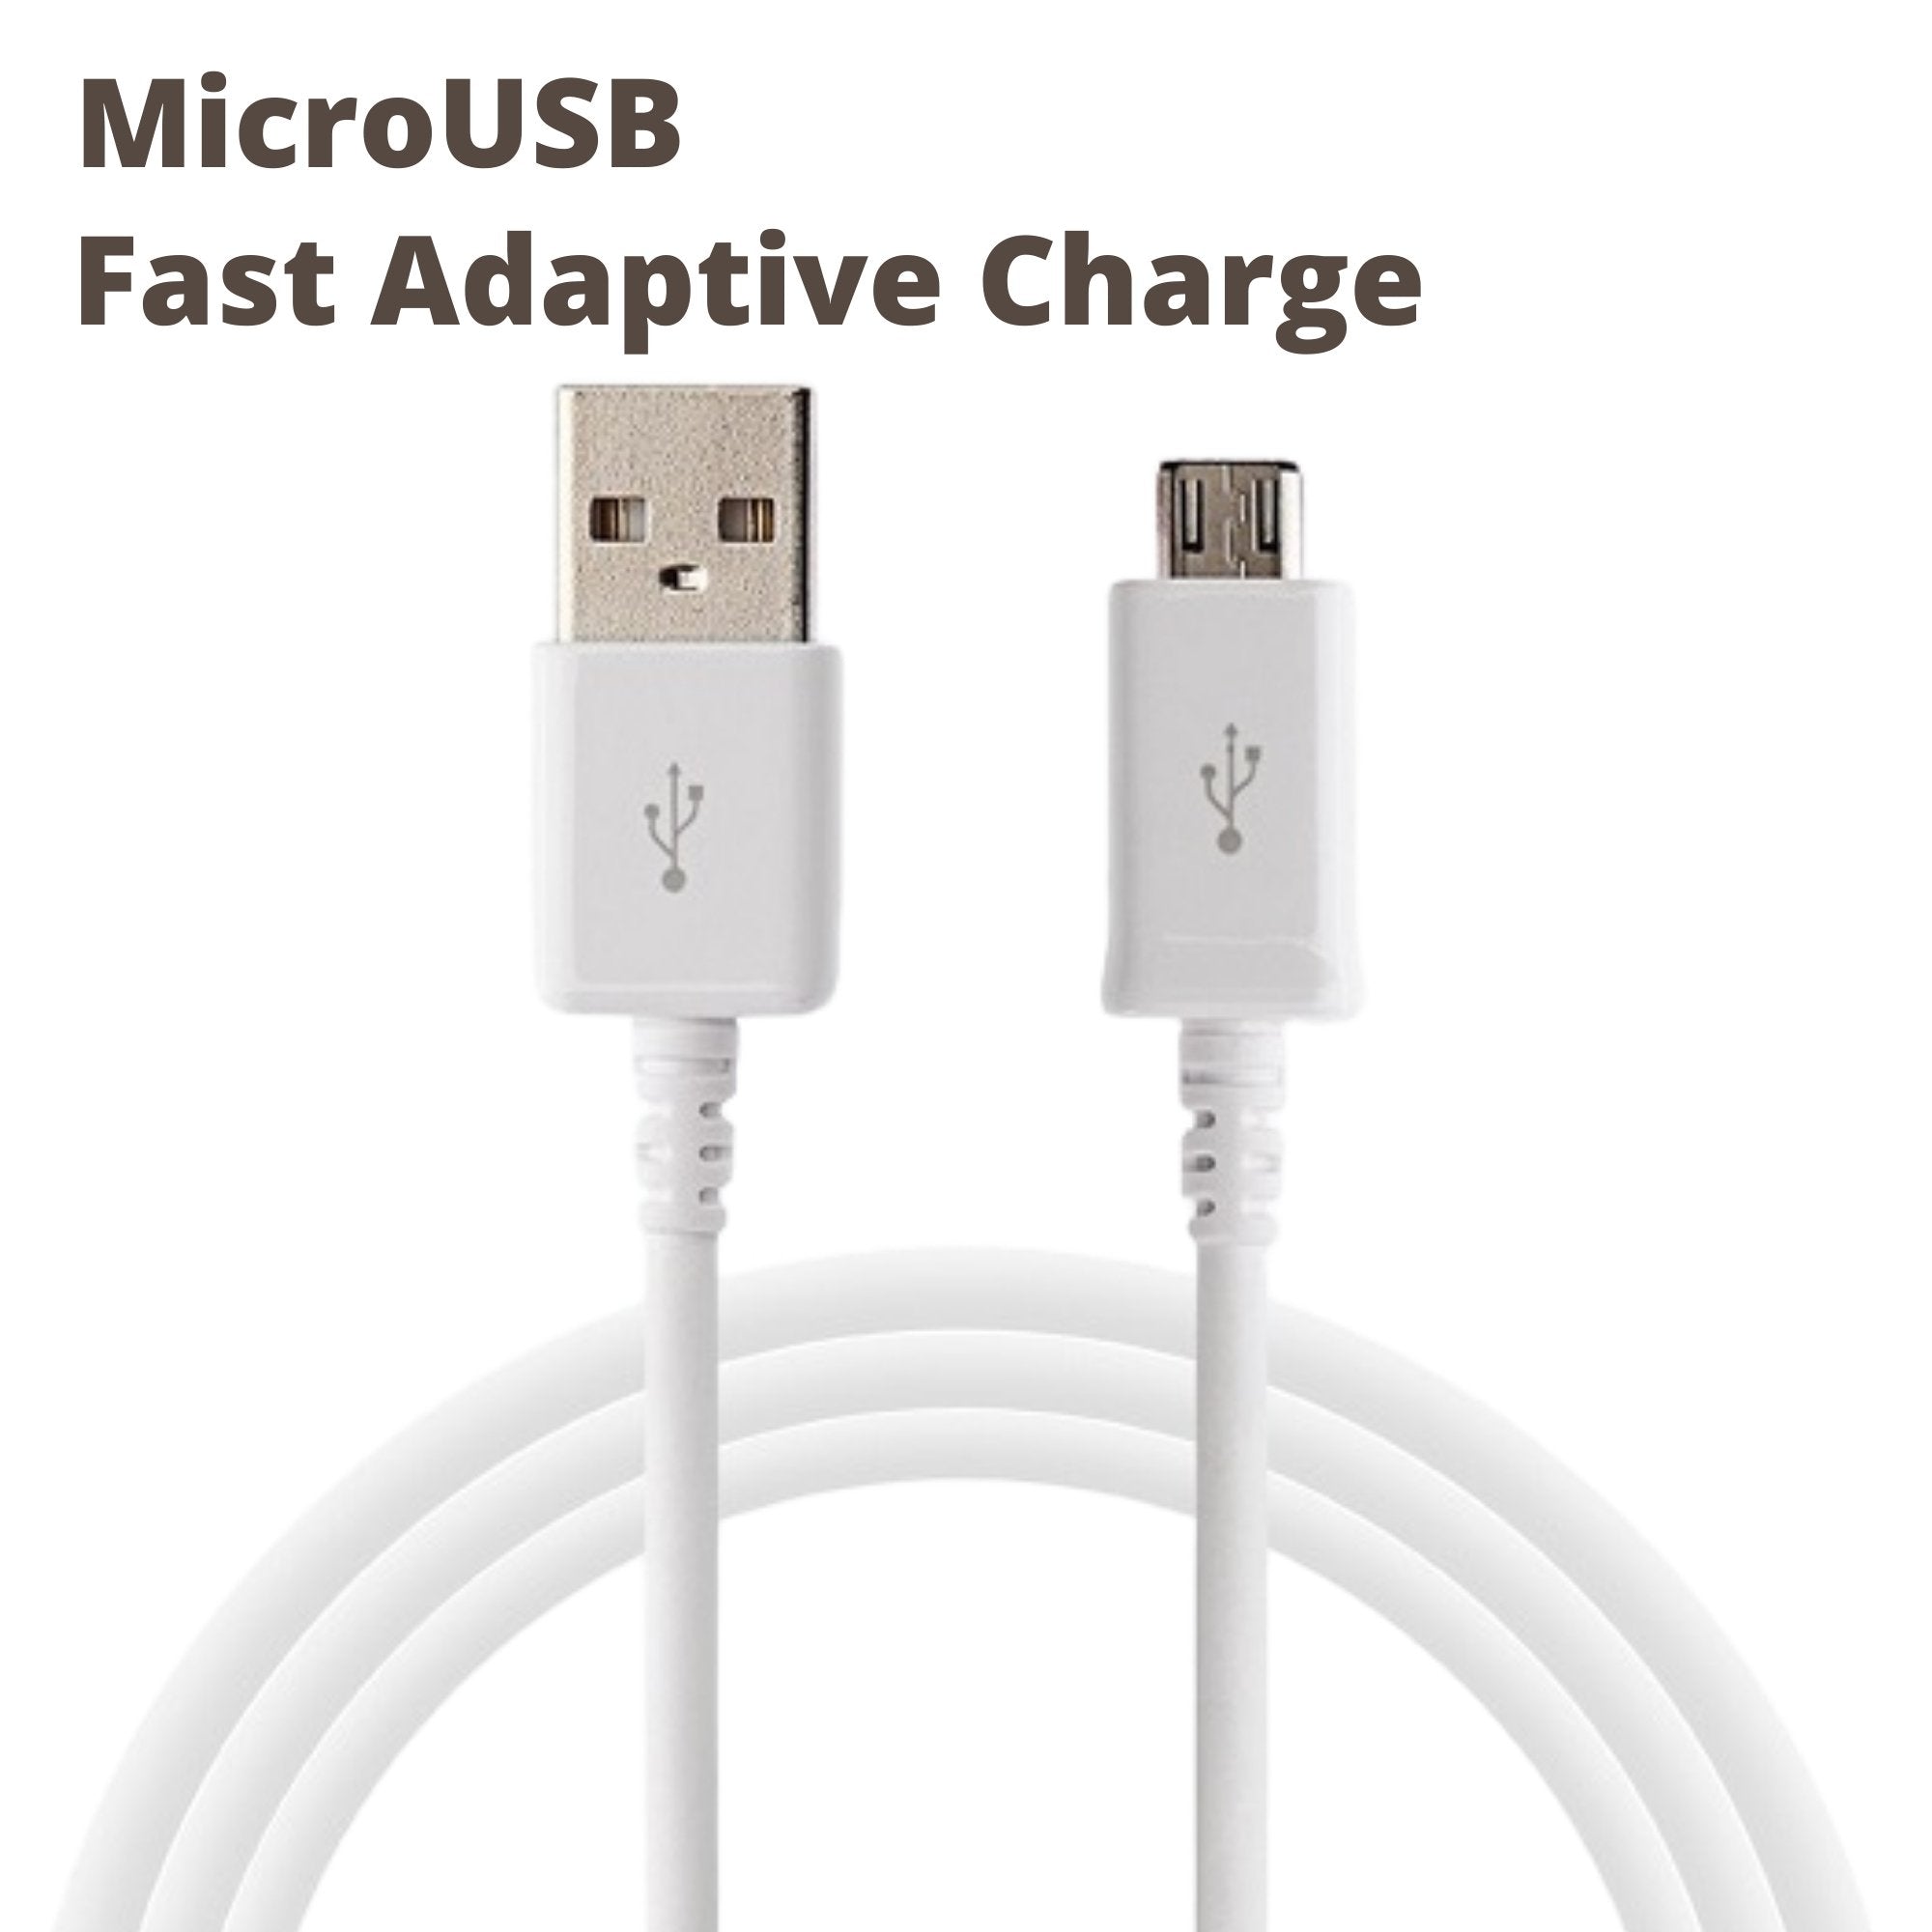 Samsung Galaxy On Max Adaptive Fast Mobile Charger 2 Amp With 1mt Data and Sync Cable White